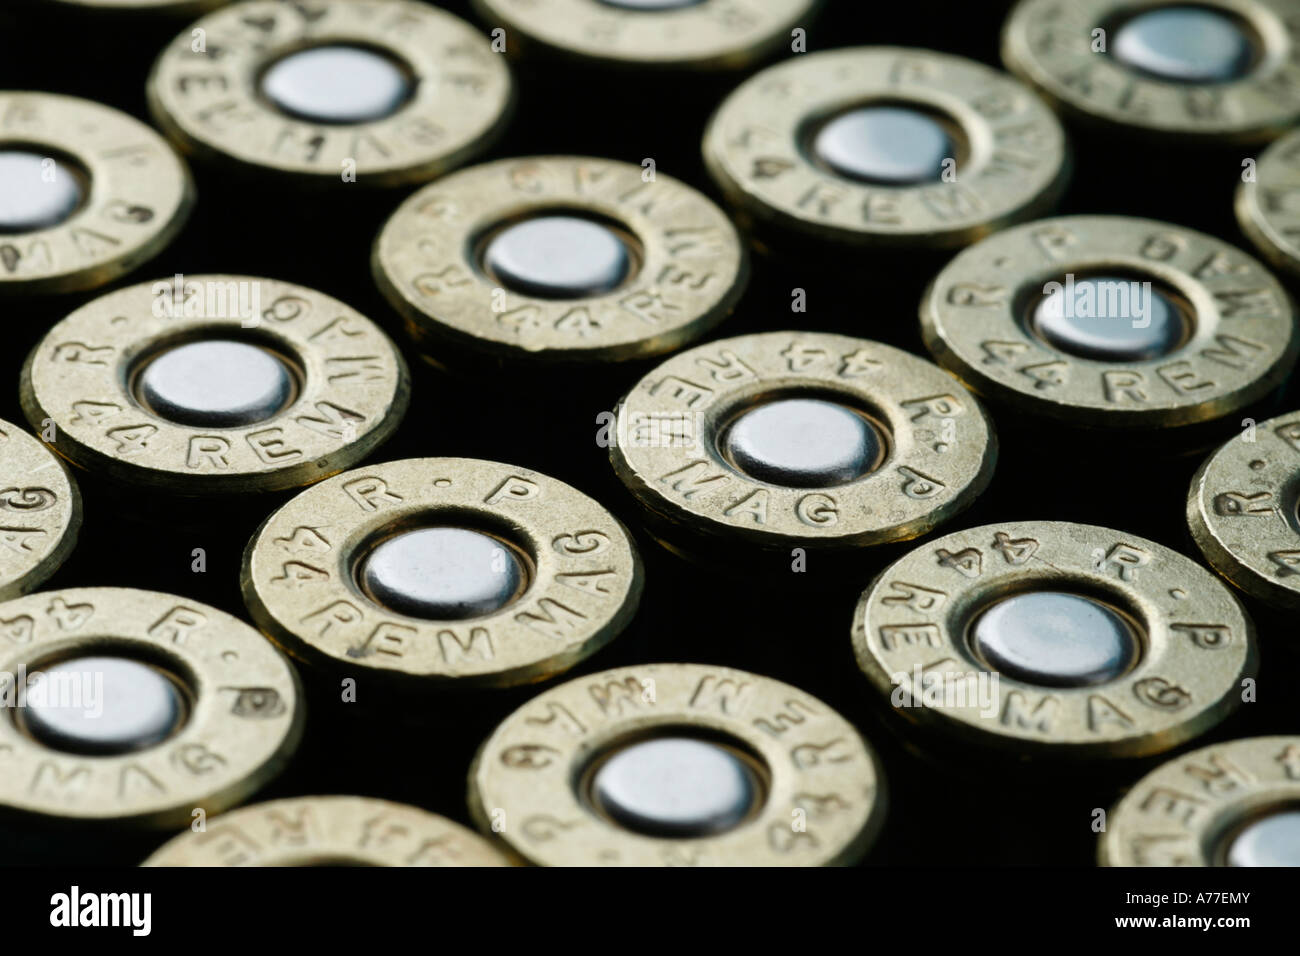 A close up image of live .44 magnum revolver rounds ready for firing Stock Photo